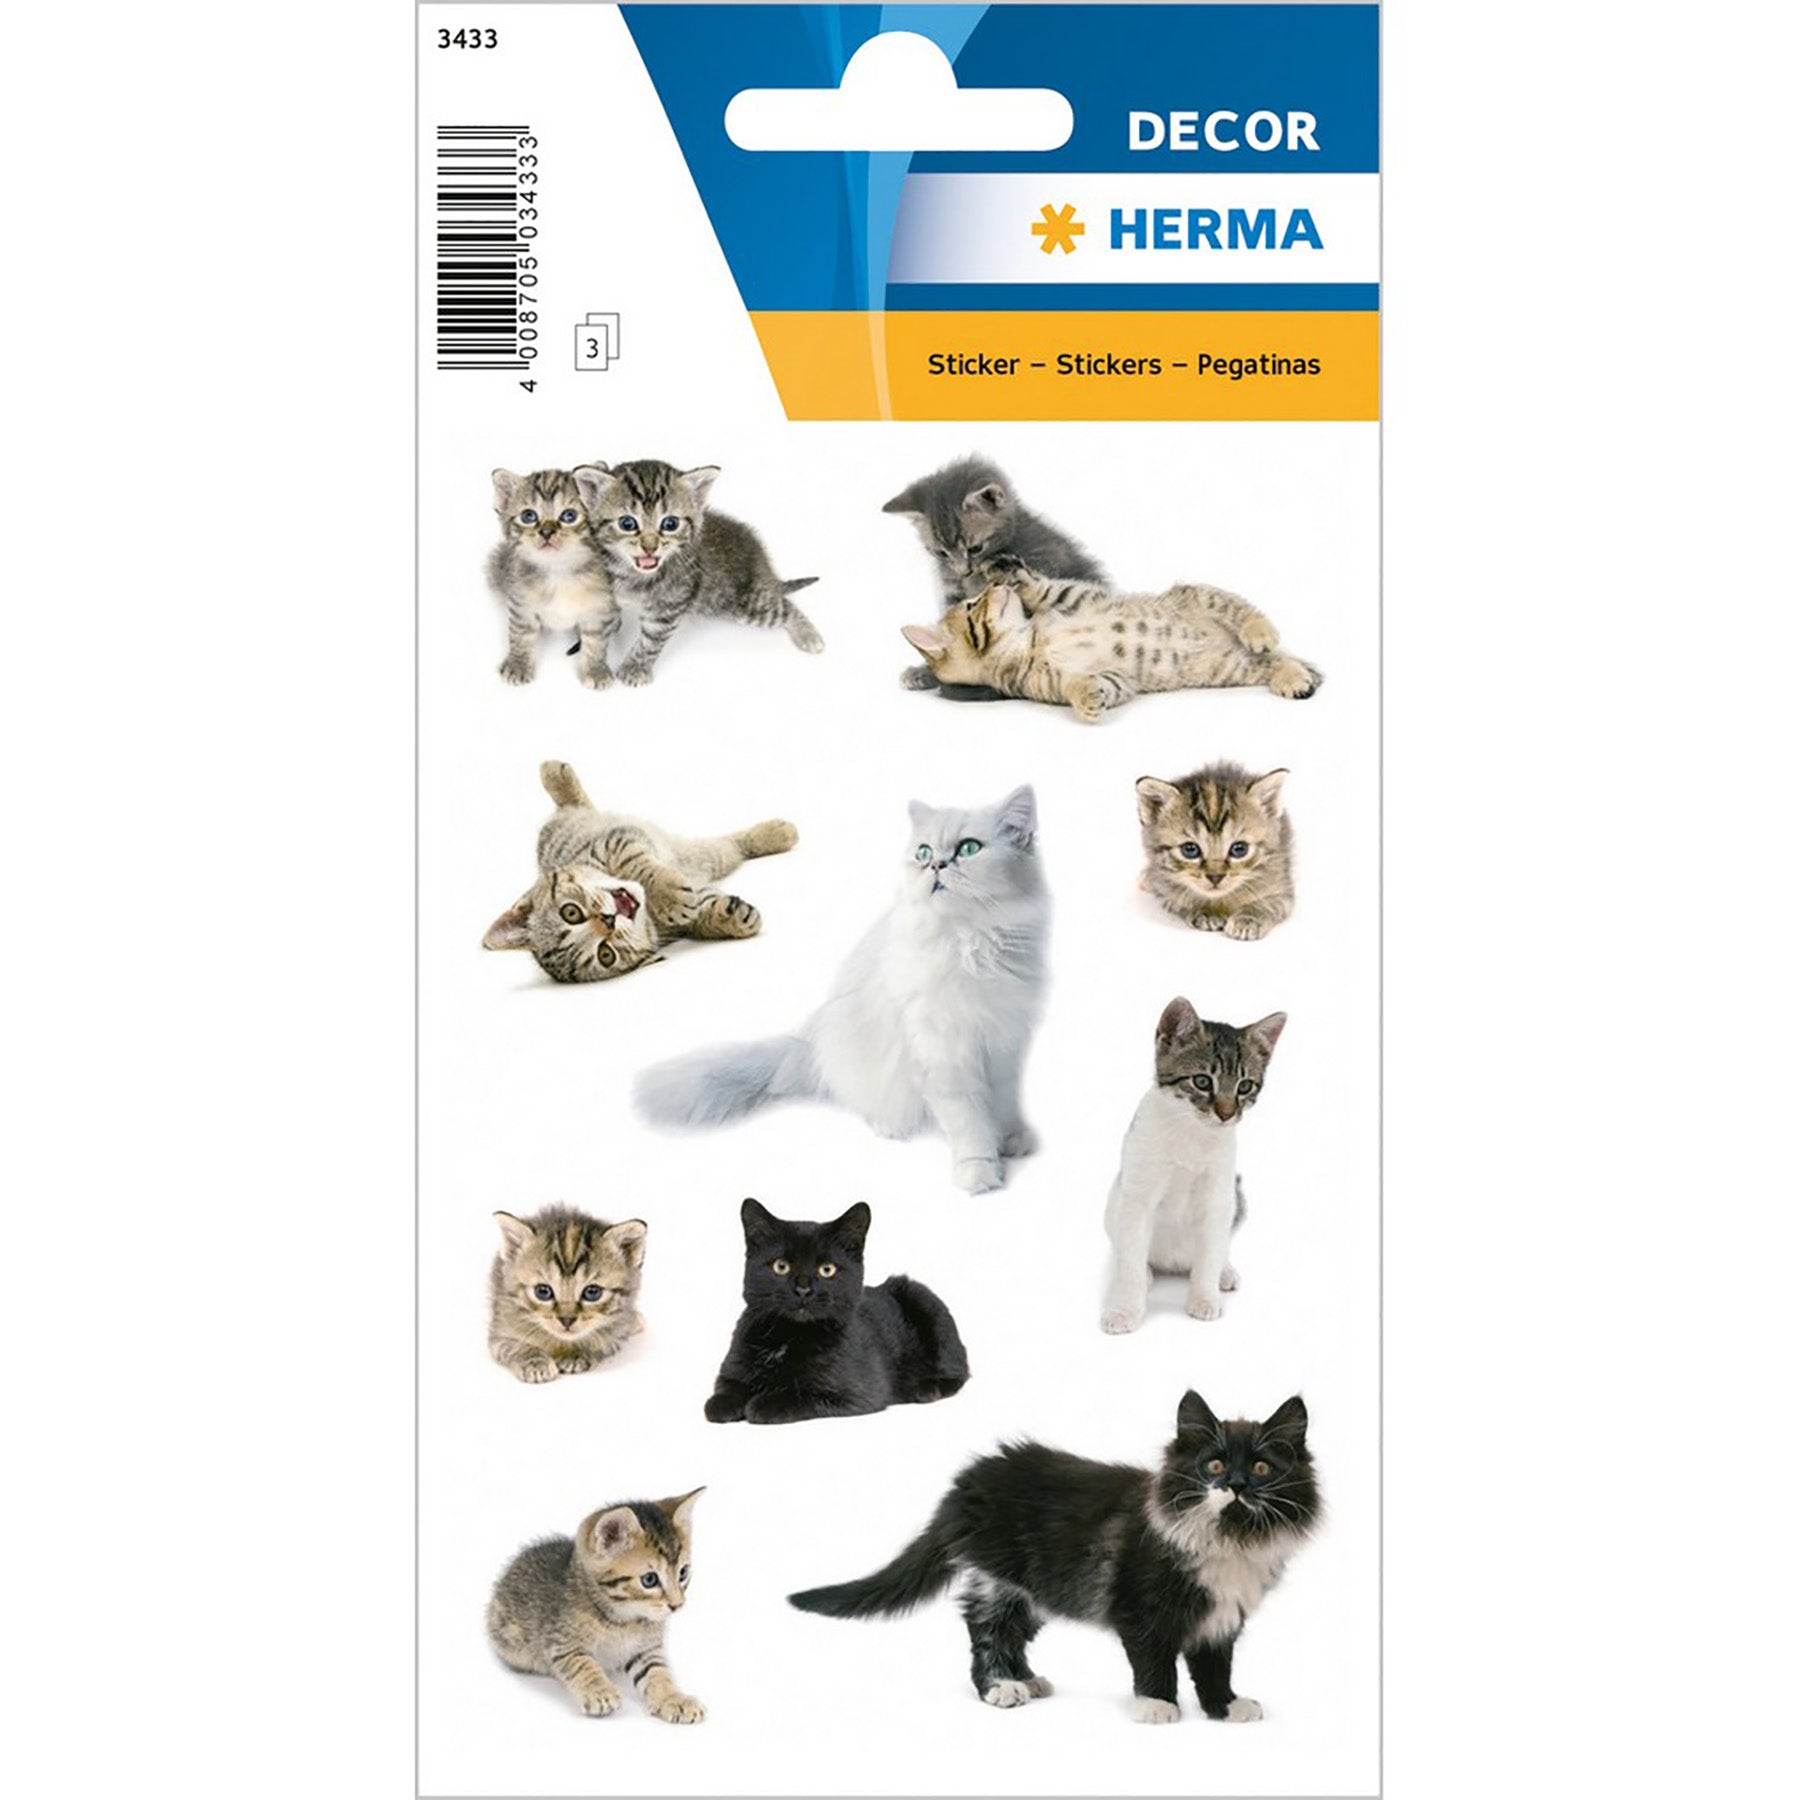 Herma Decor 3 Sheets Stickers Cat Photos 4.75x3.1in Sheet